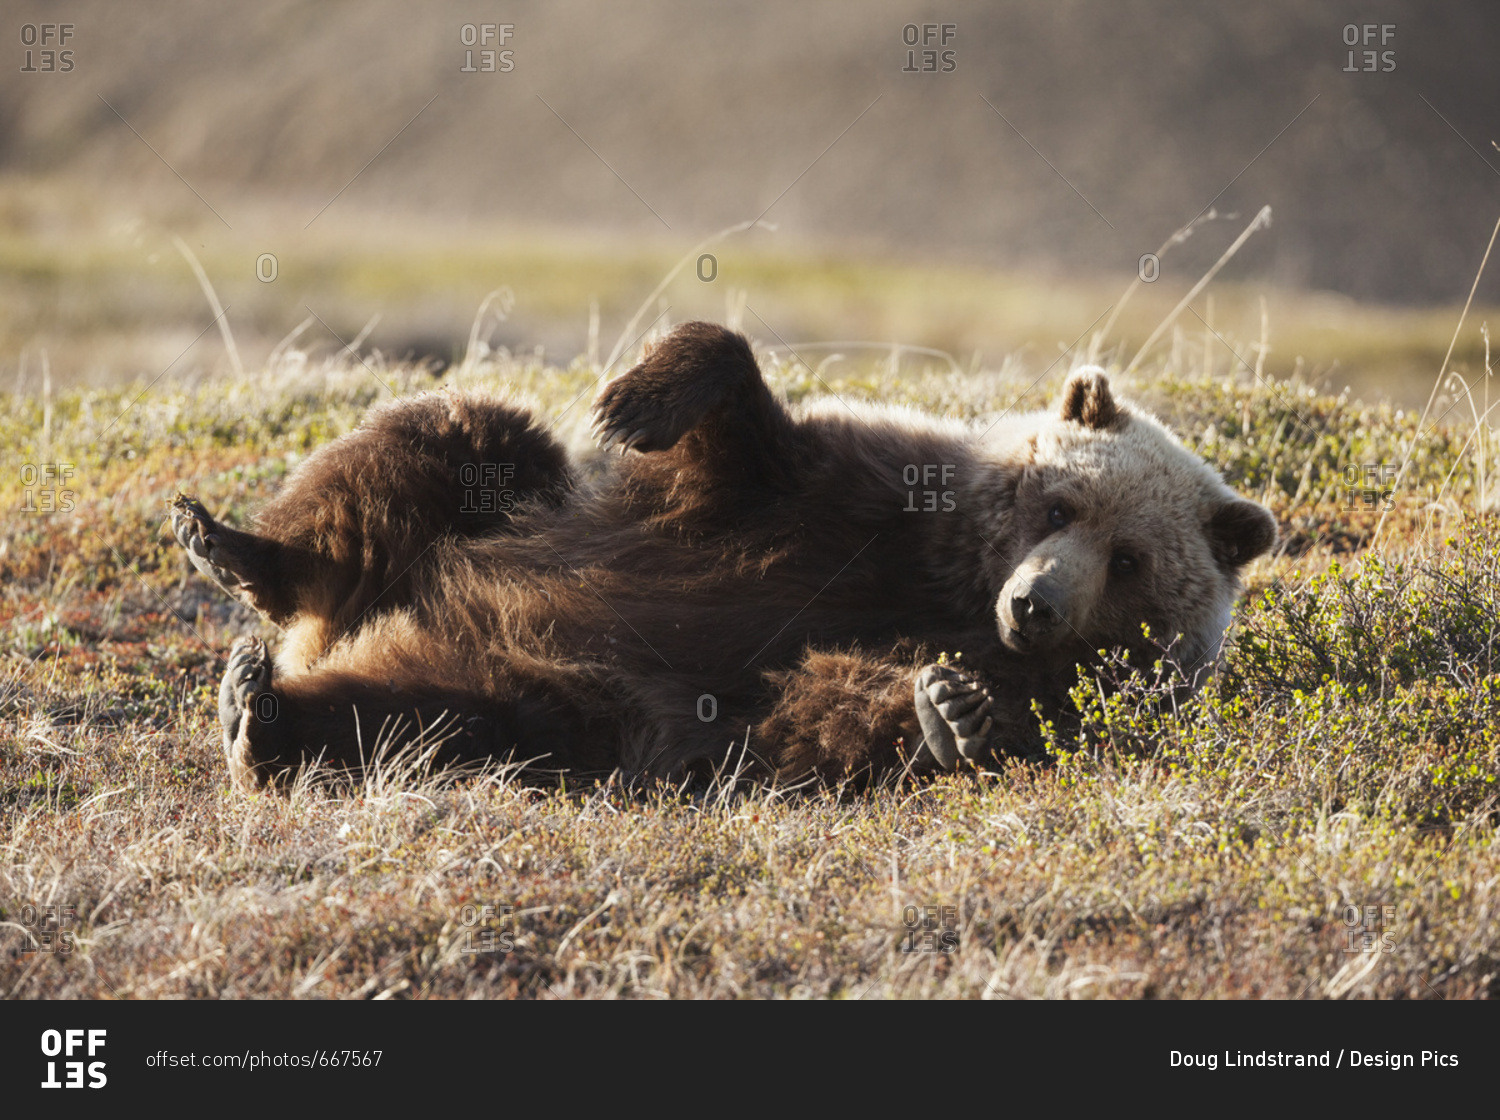 June 11, 2013: Grizzly Bear Rolling On Ground In Denali National Park & Preserve In Interior Alaska.